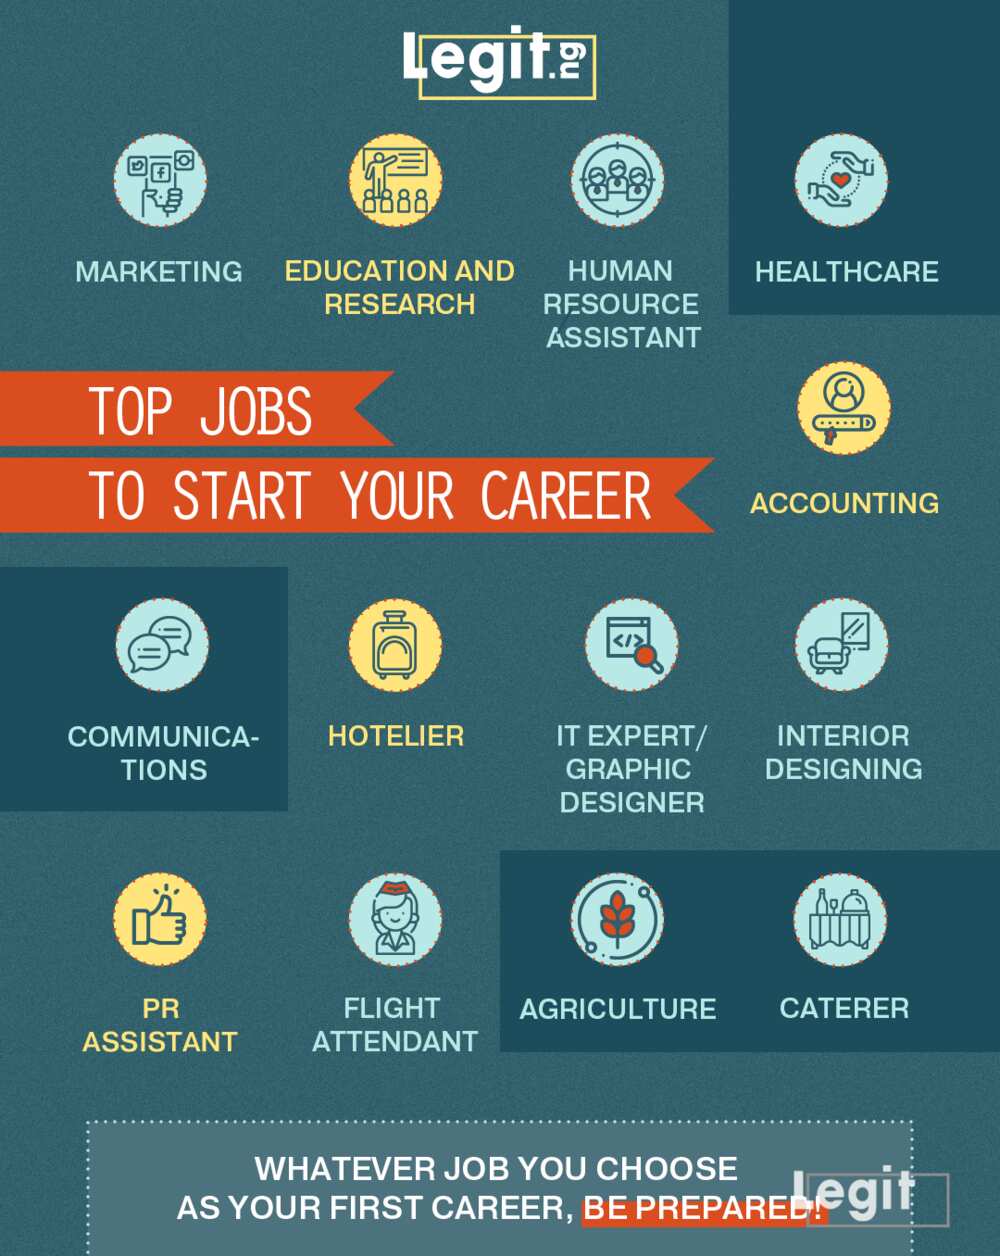 13 top jobs that will help start your career